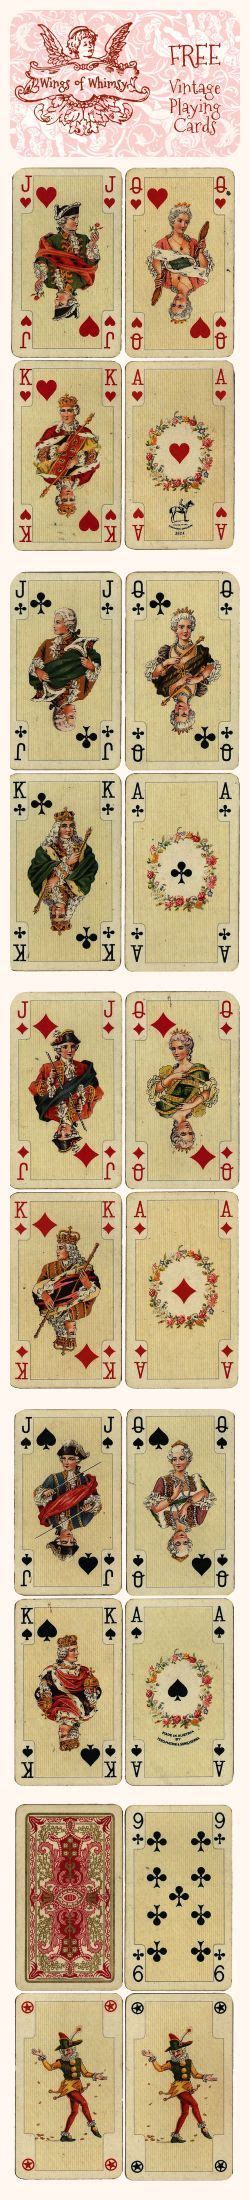 Antique French Playing Cards Free Large Printables Cards Vintage